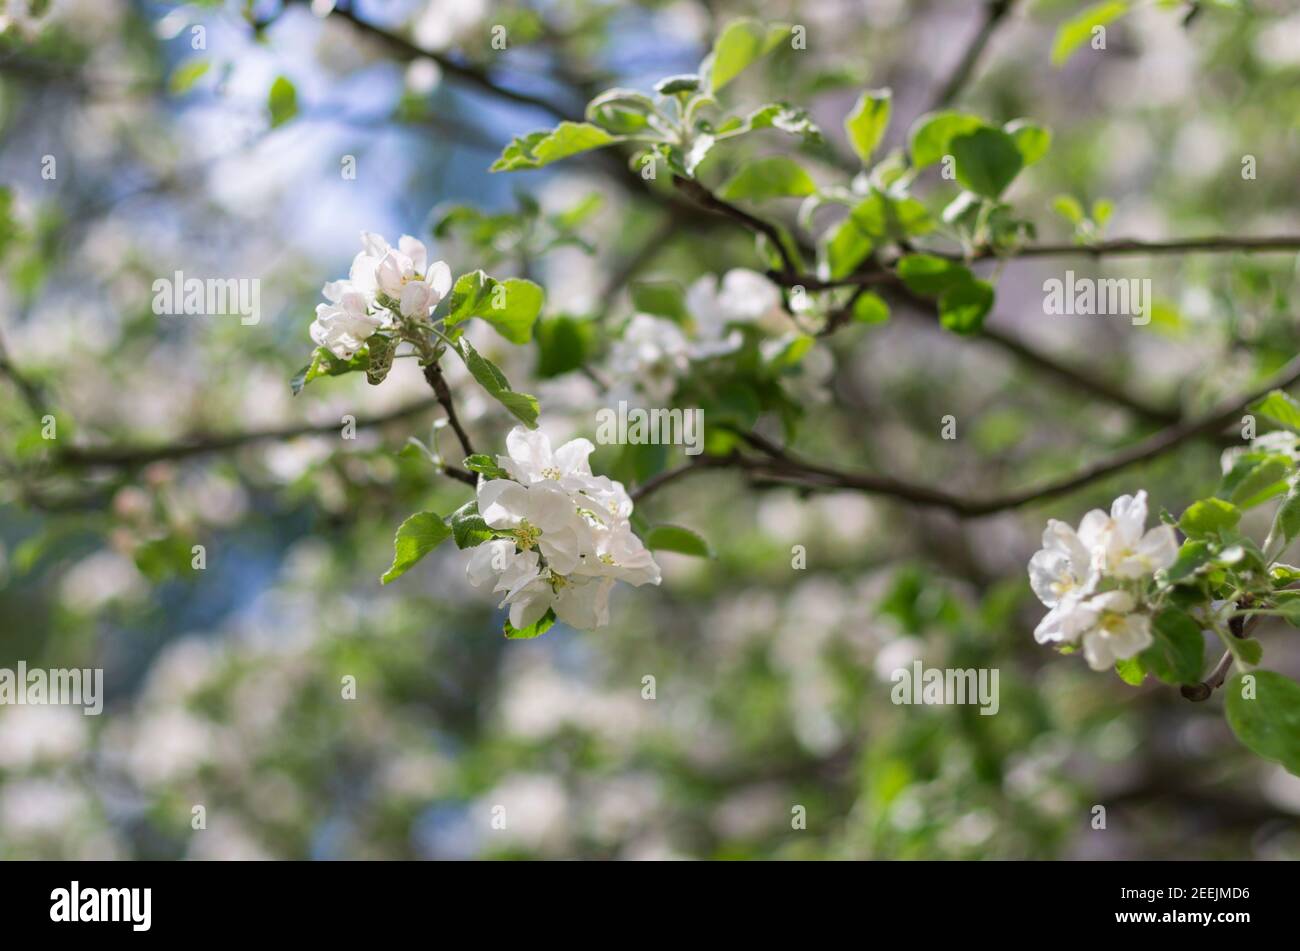 White apple blossoms on a green branch in spring closeup Stock Photo